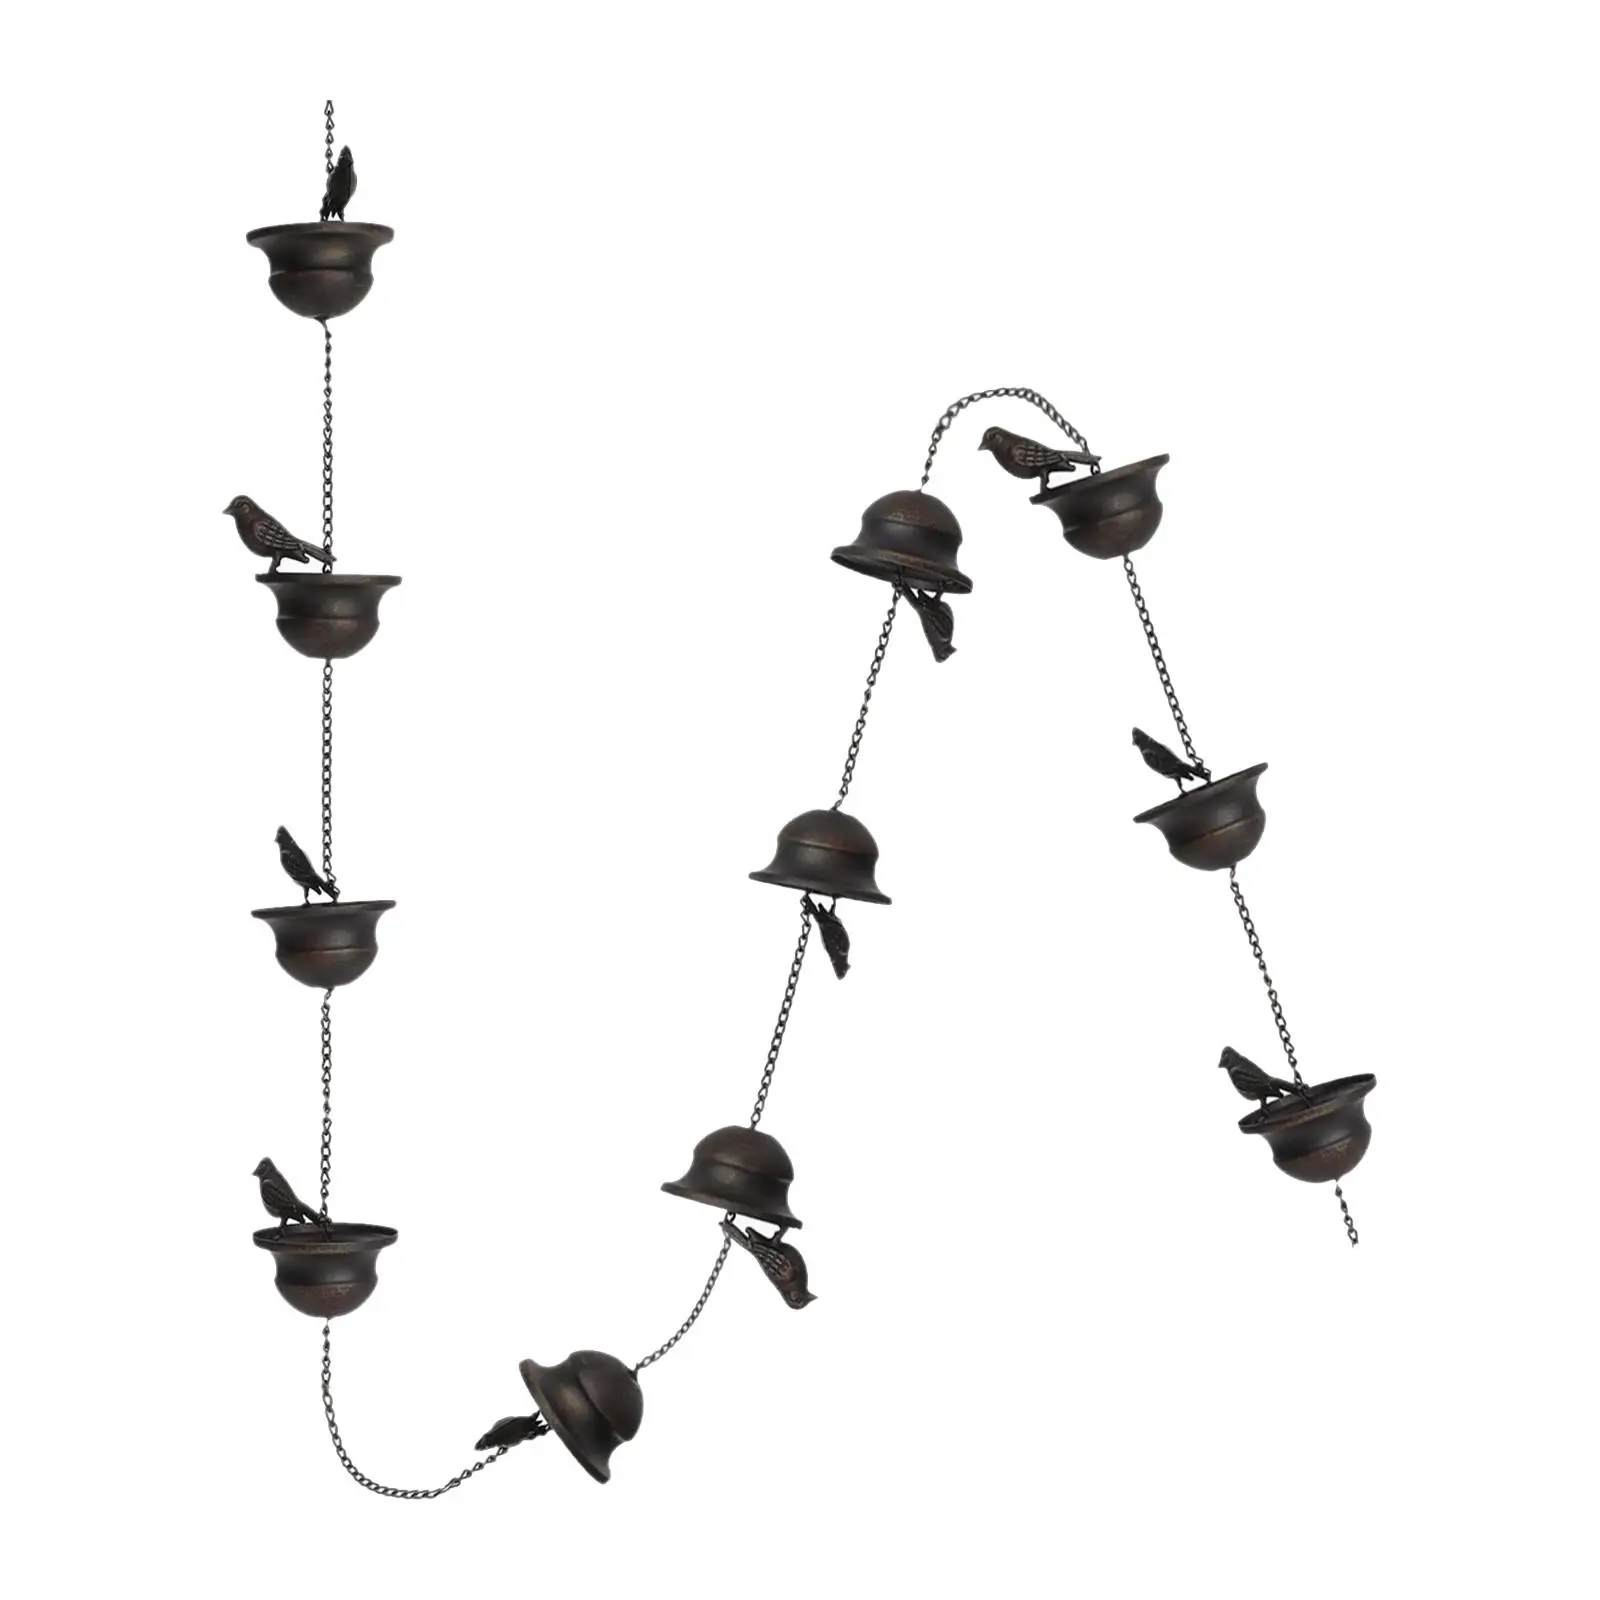 Bird Rain Chains for Gutters Replacement Downspouts Pouring Cups Rainwater Diverter 94.5inch for Yard Garden Home Sheds Display